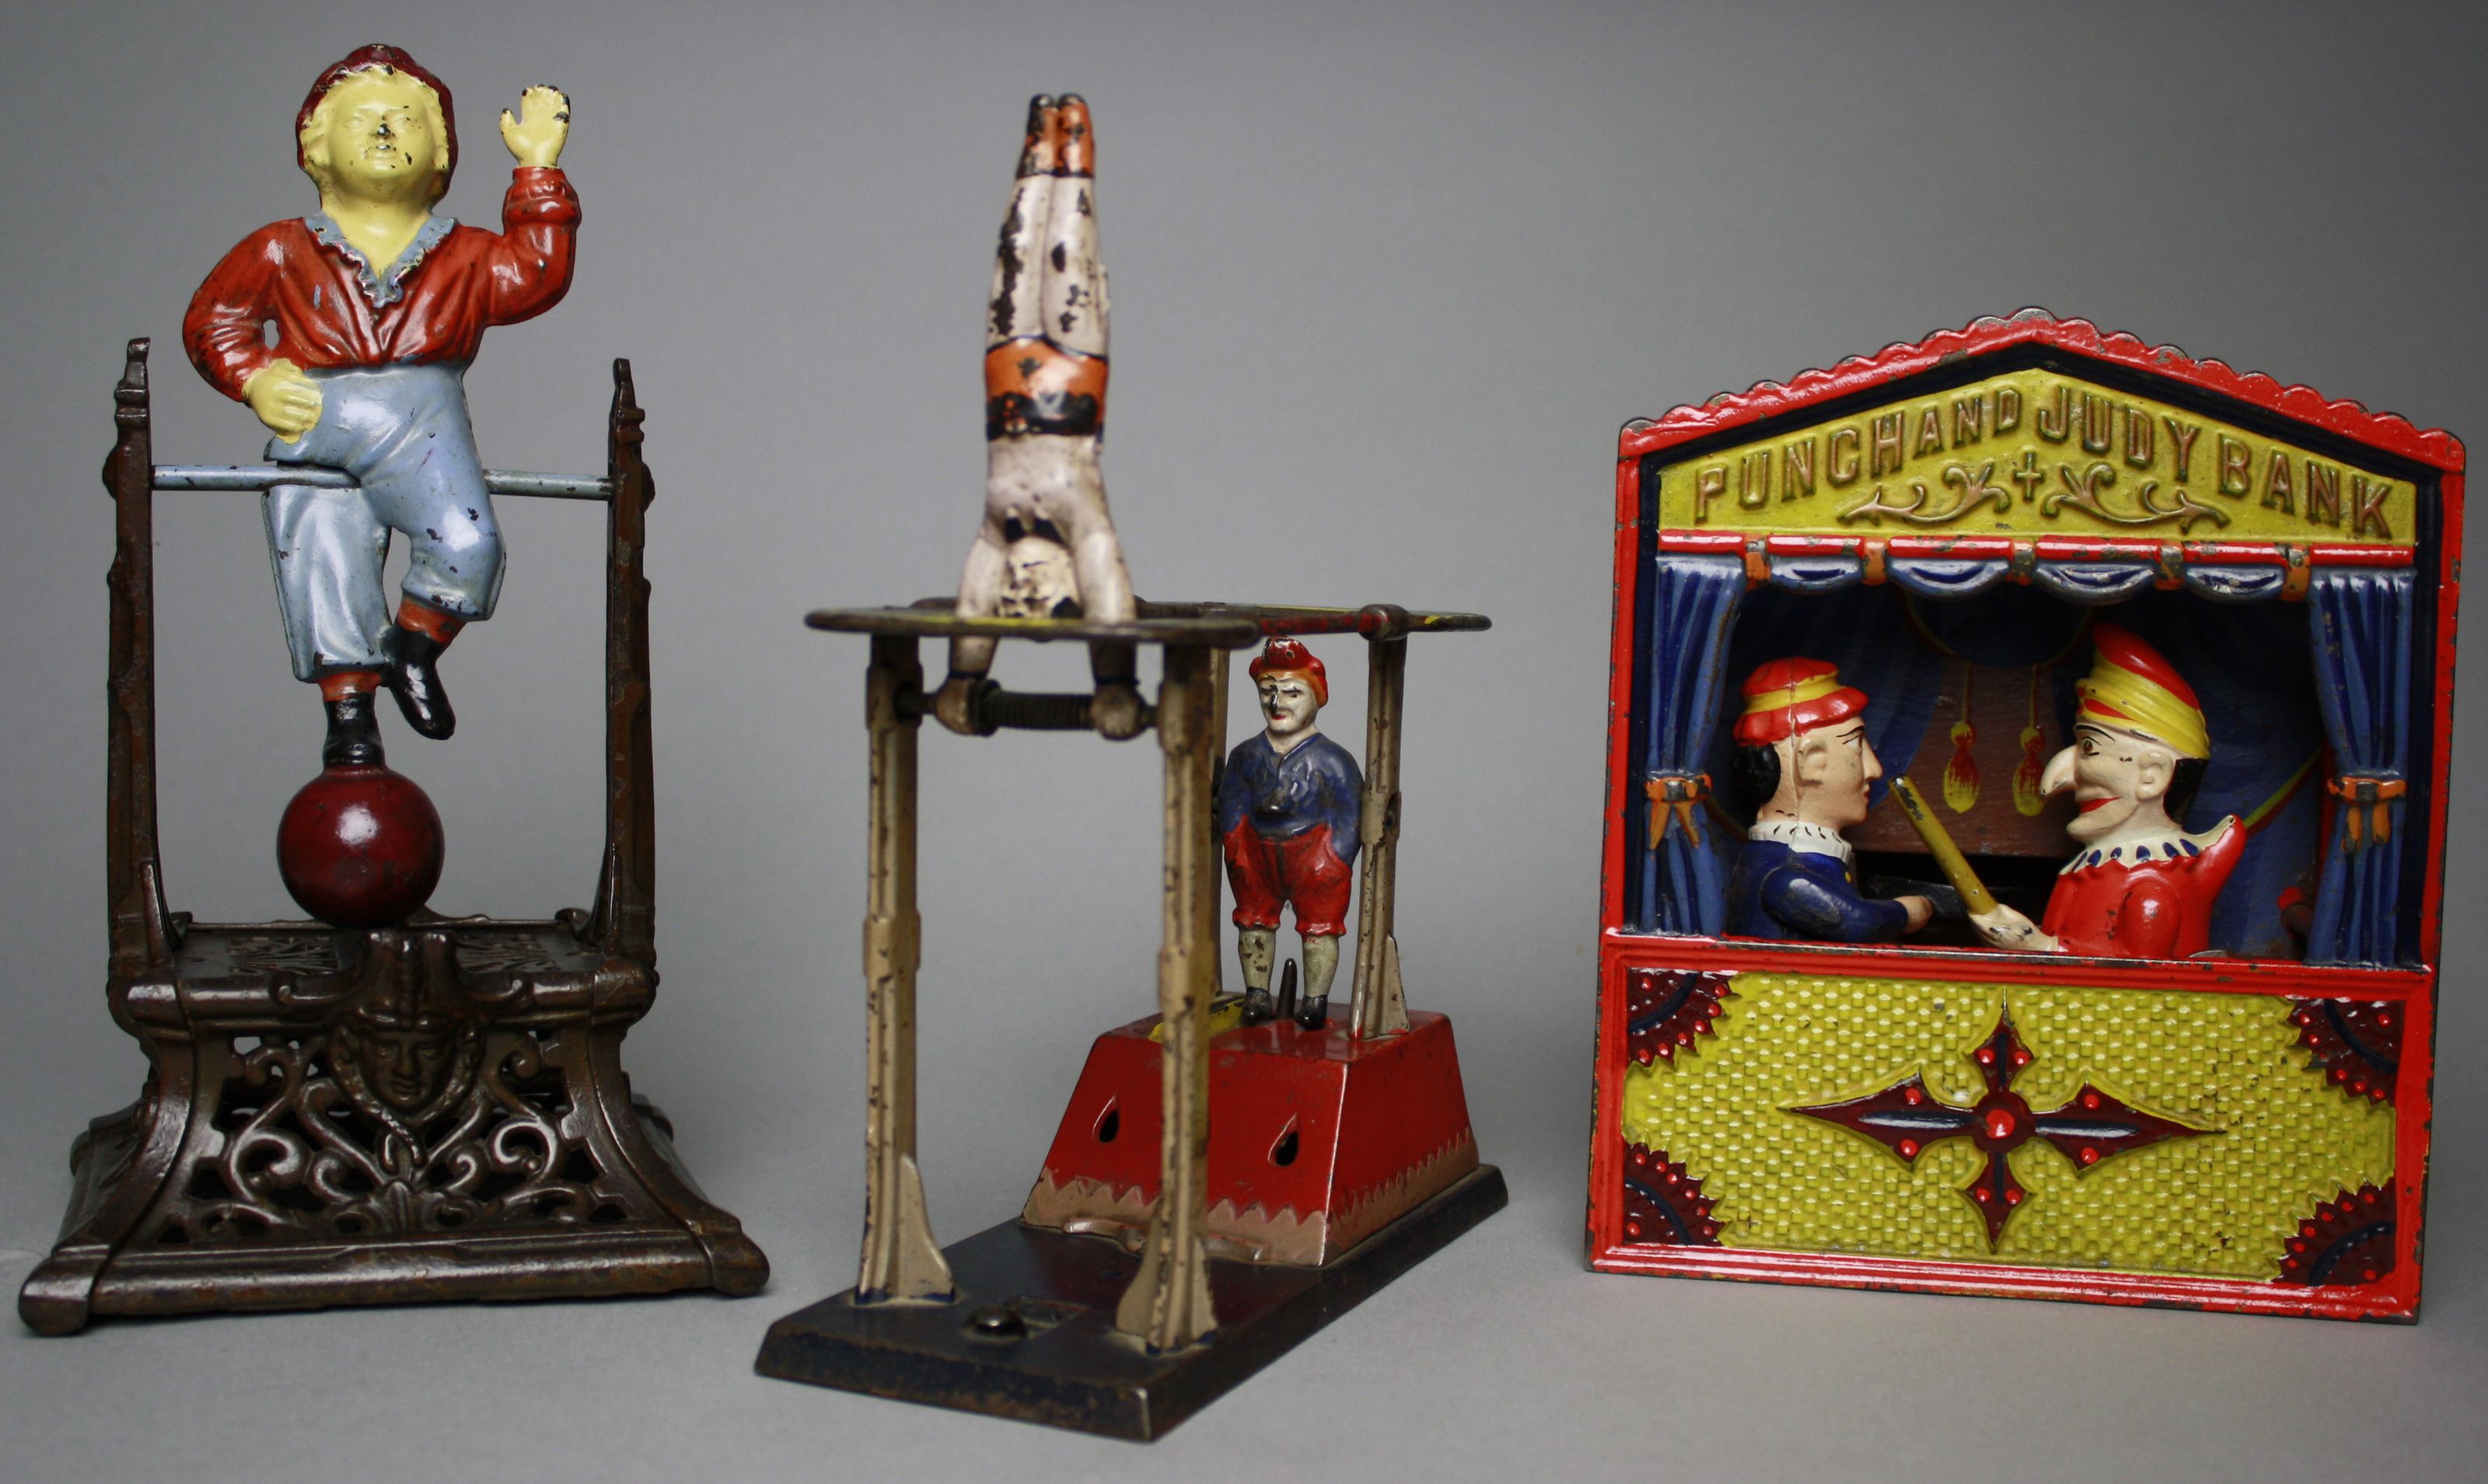 Among the many near-mint mechanical banks to be auctioned are (left to right): Boy on Trapeze, Acrobats, and Punch and Judy with large-size lettering. RSL Auction image